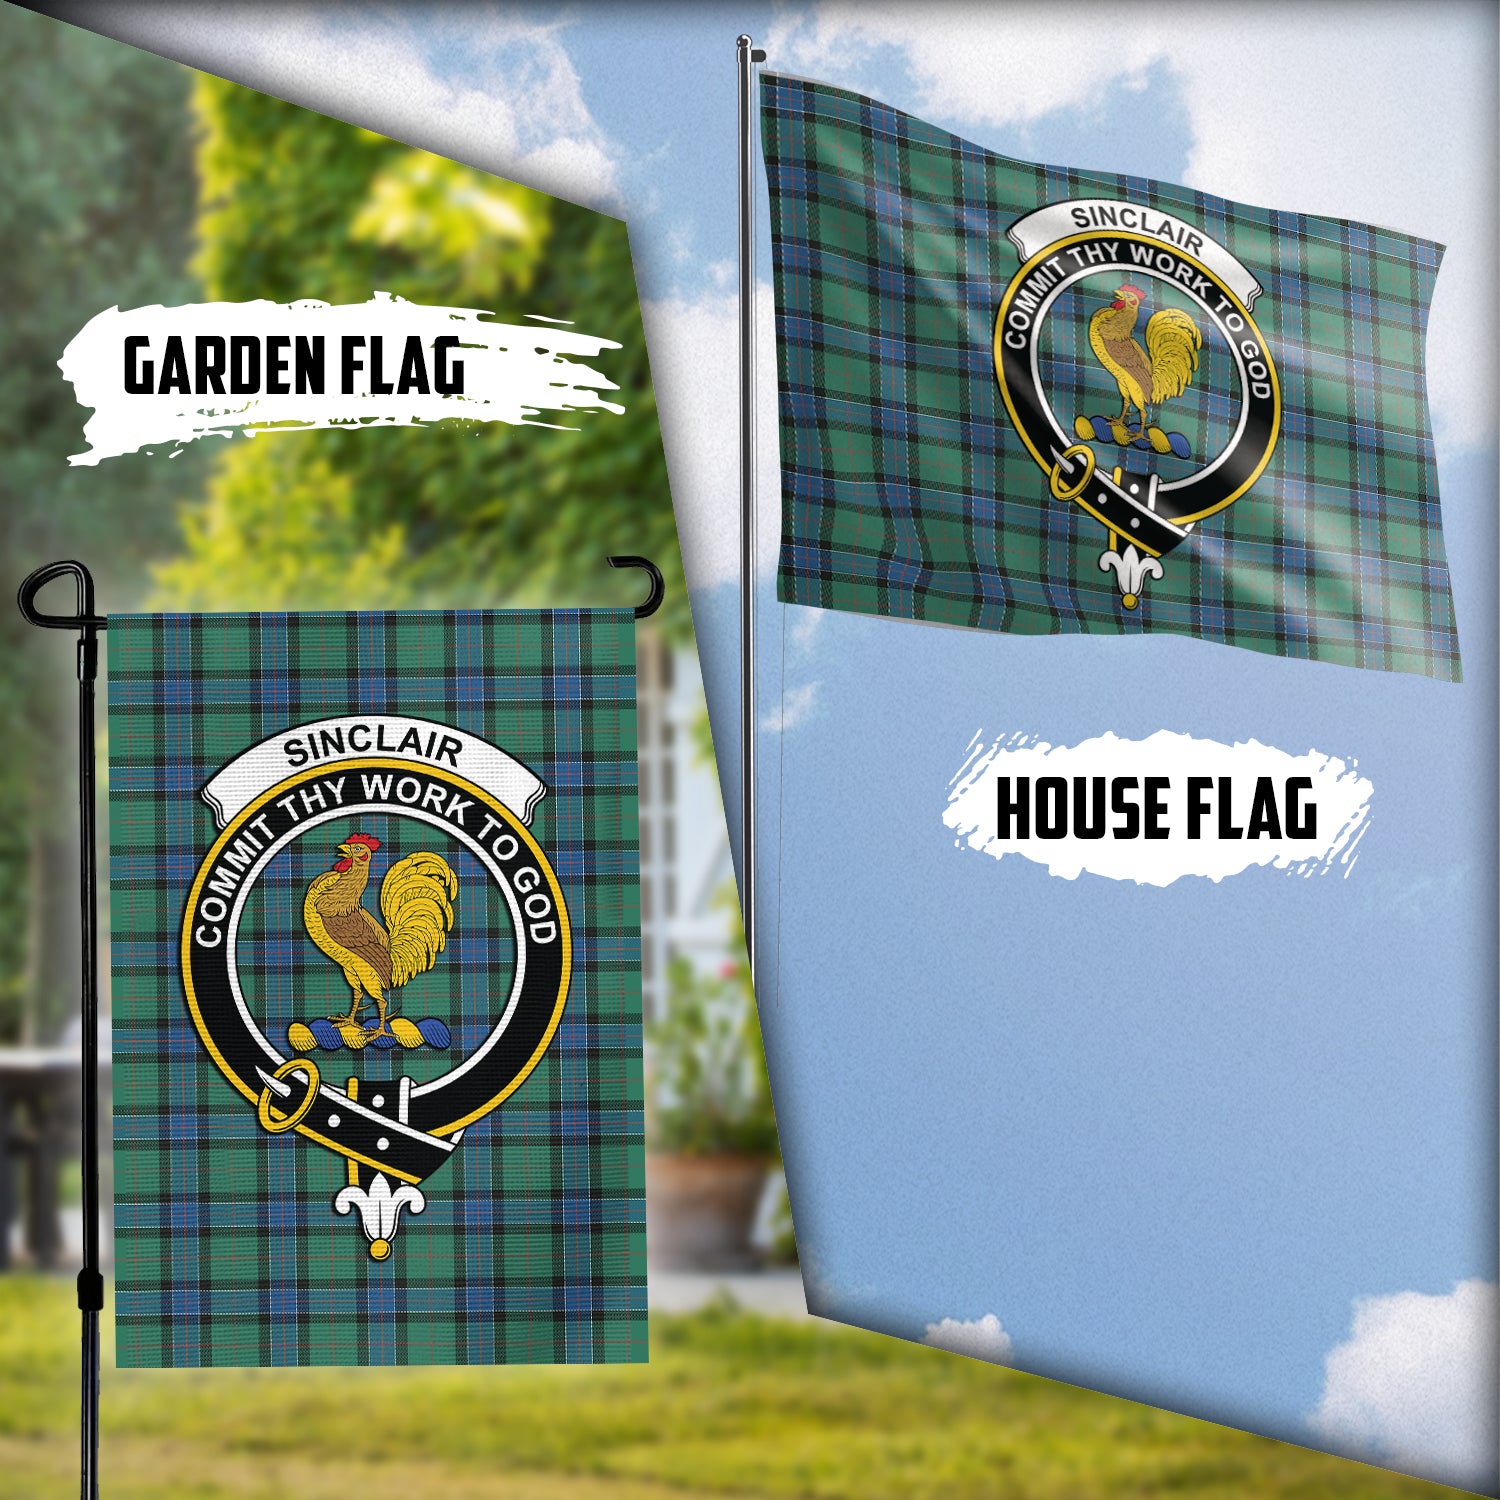 sinclair-hunting-ancient-tartan-flag-with-family-crest